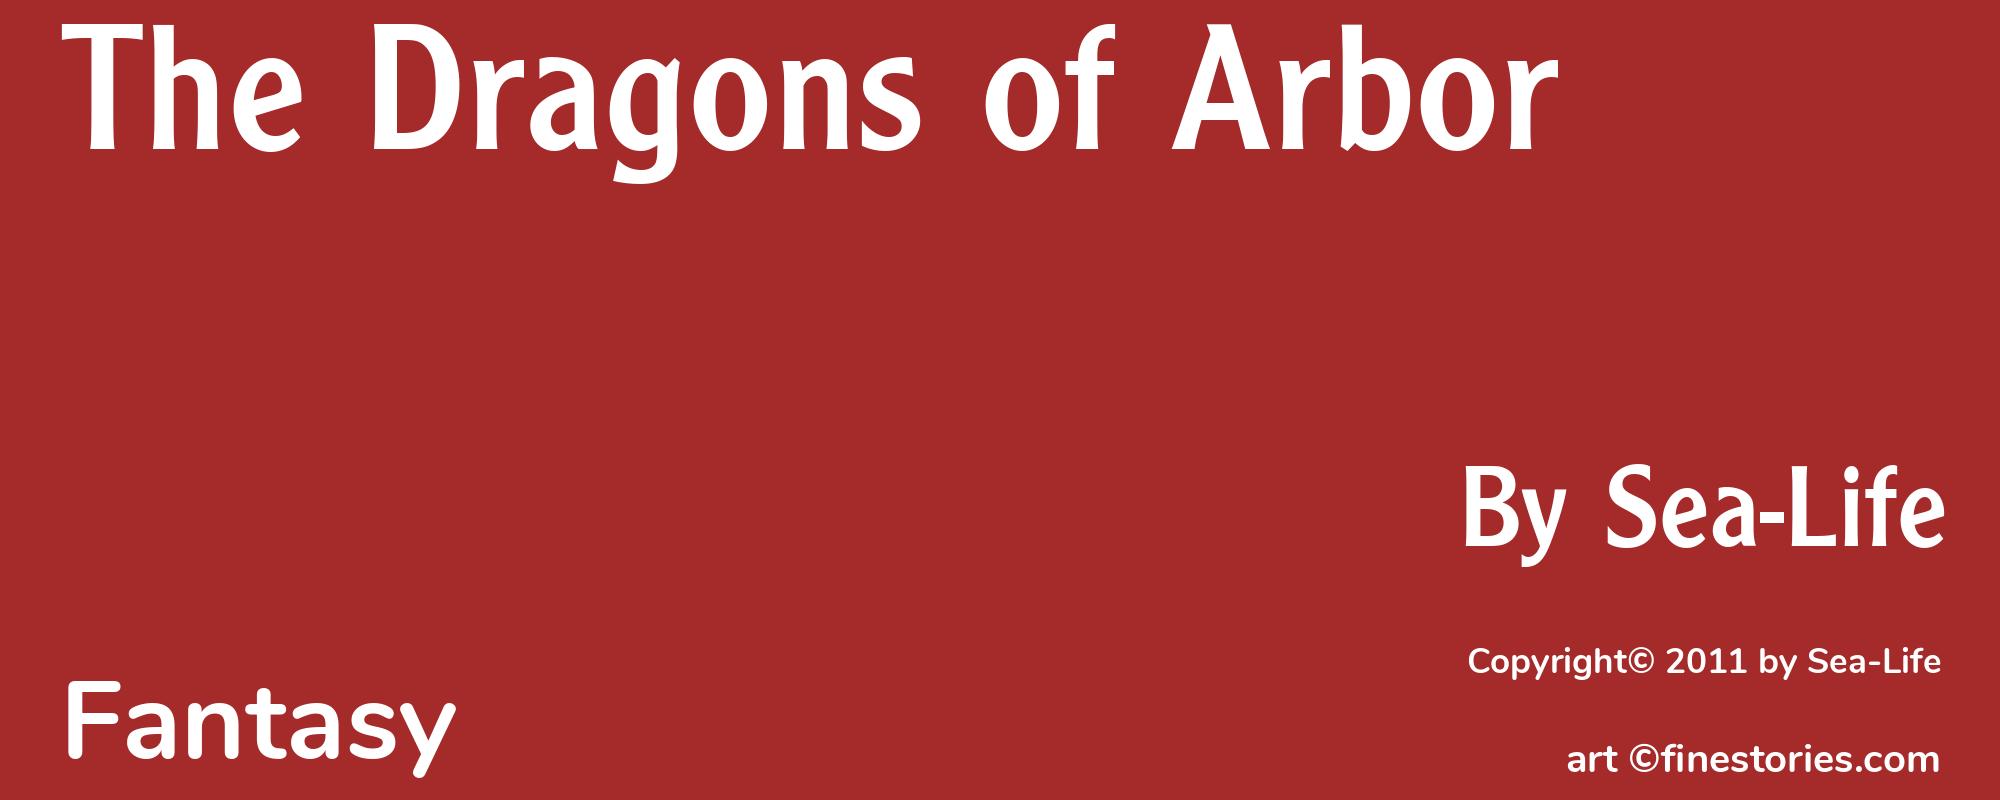 The Dragons of Arbor - Cover